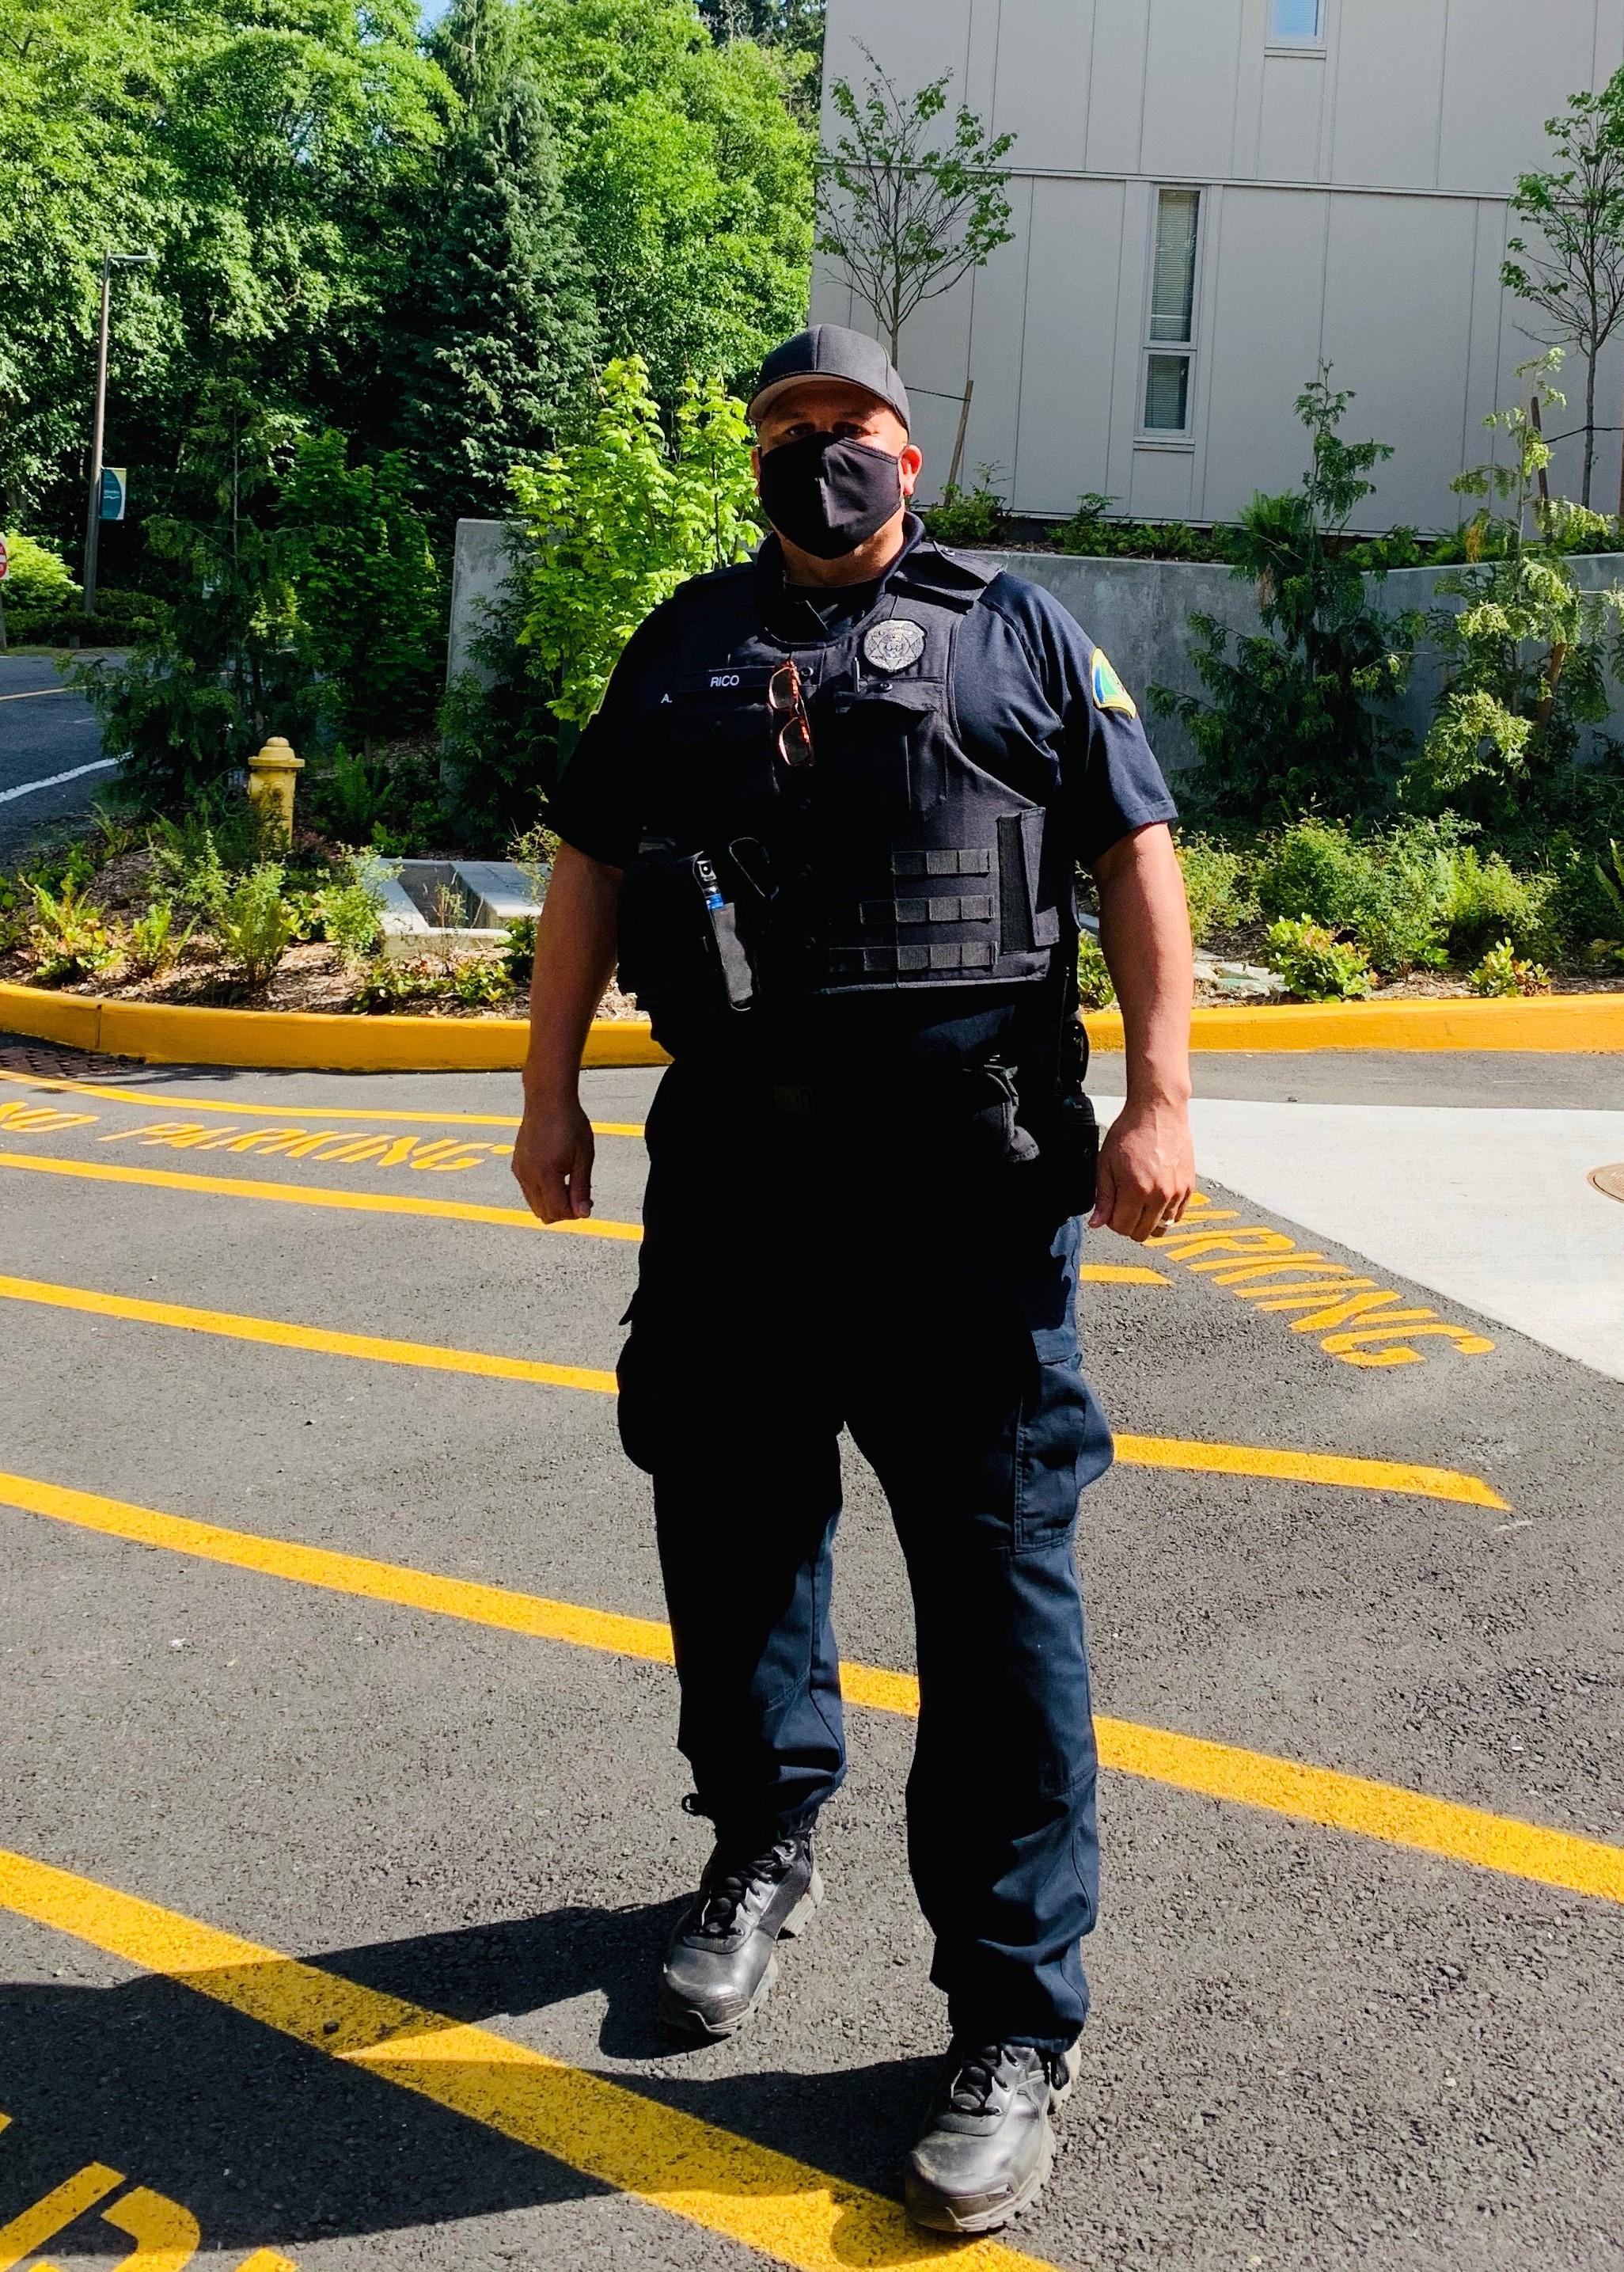 Aaron Rico, retired law enforcement and current Local 304 member and security guard at Shoreline Community College